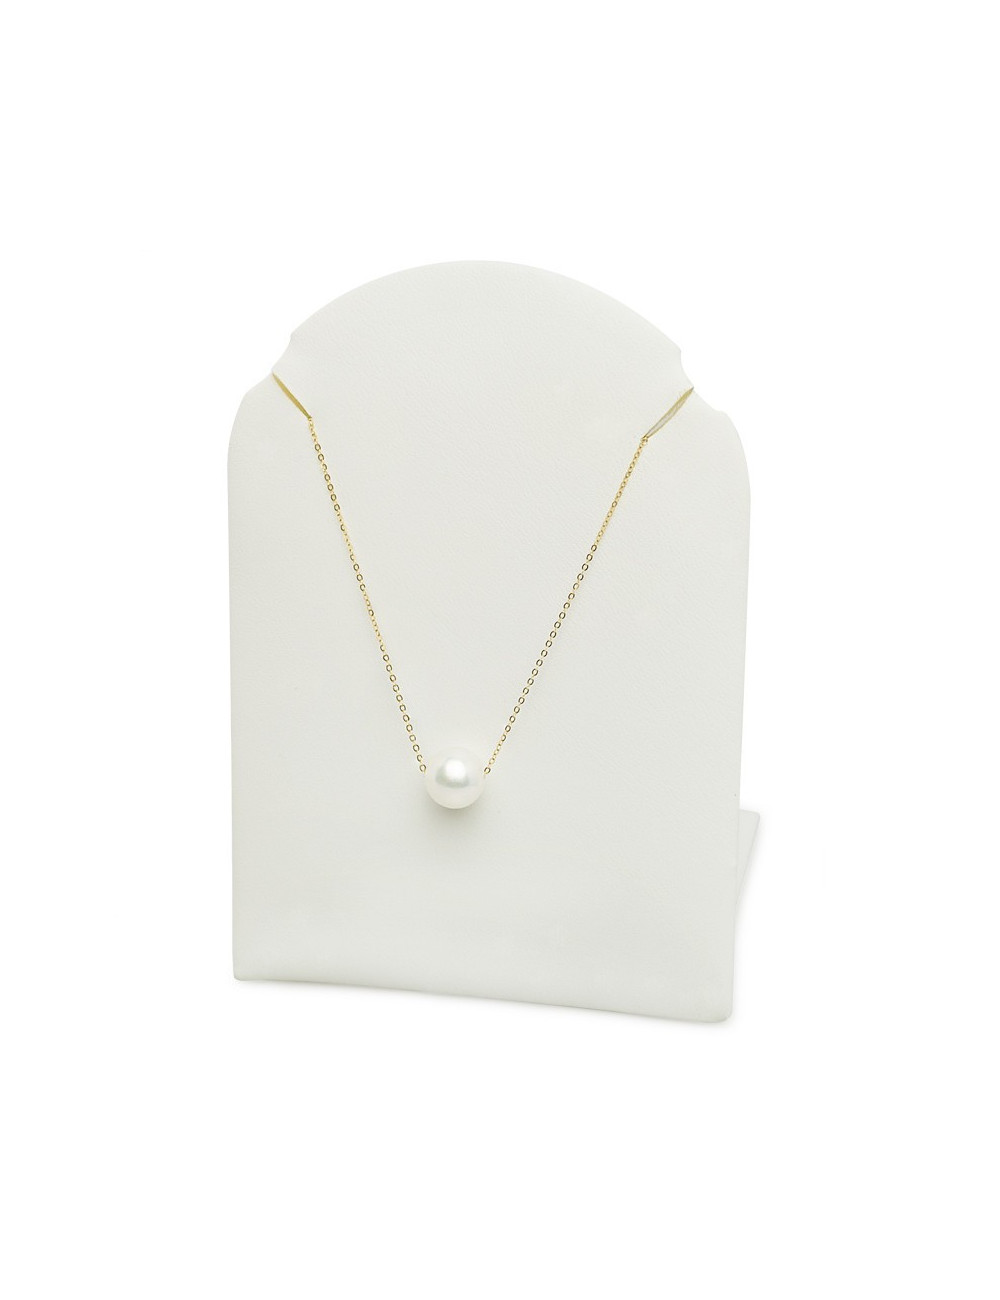 Gold delicate chain with white round pearl LAN995G